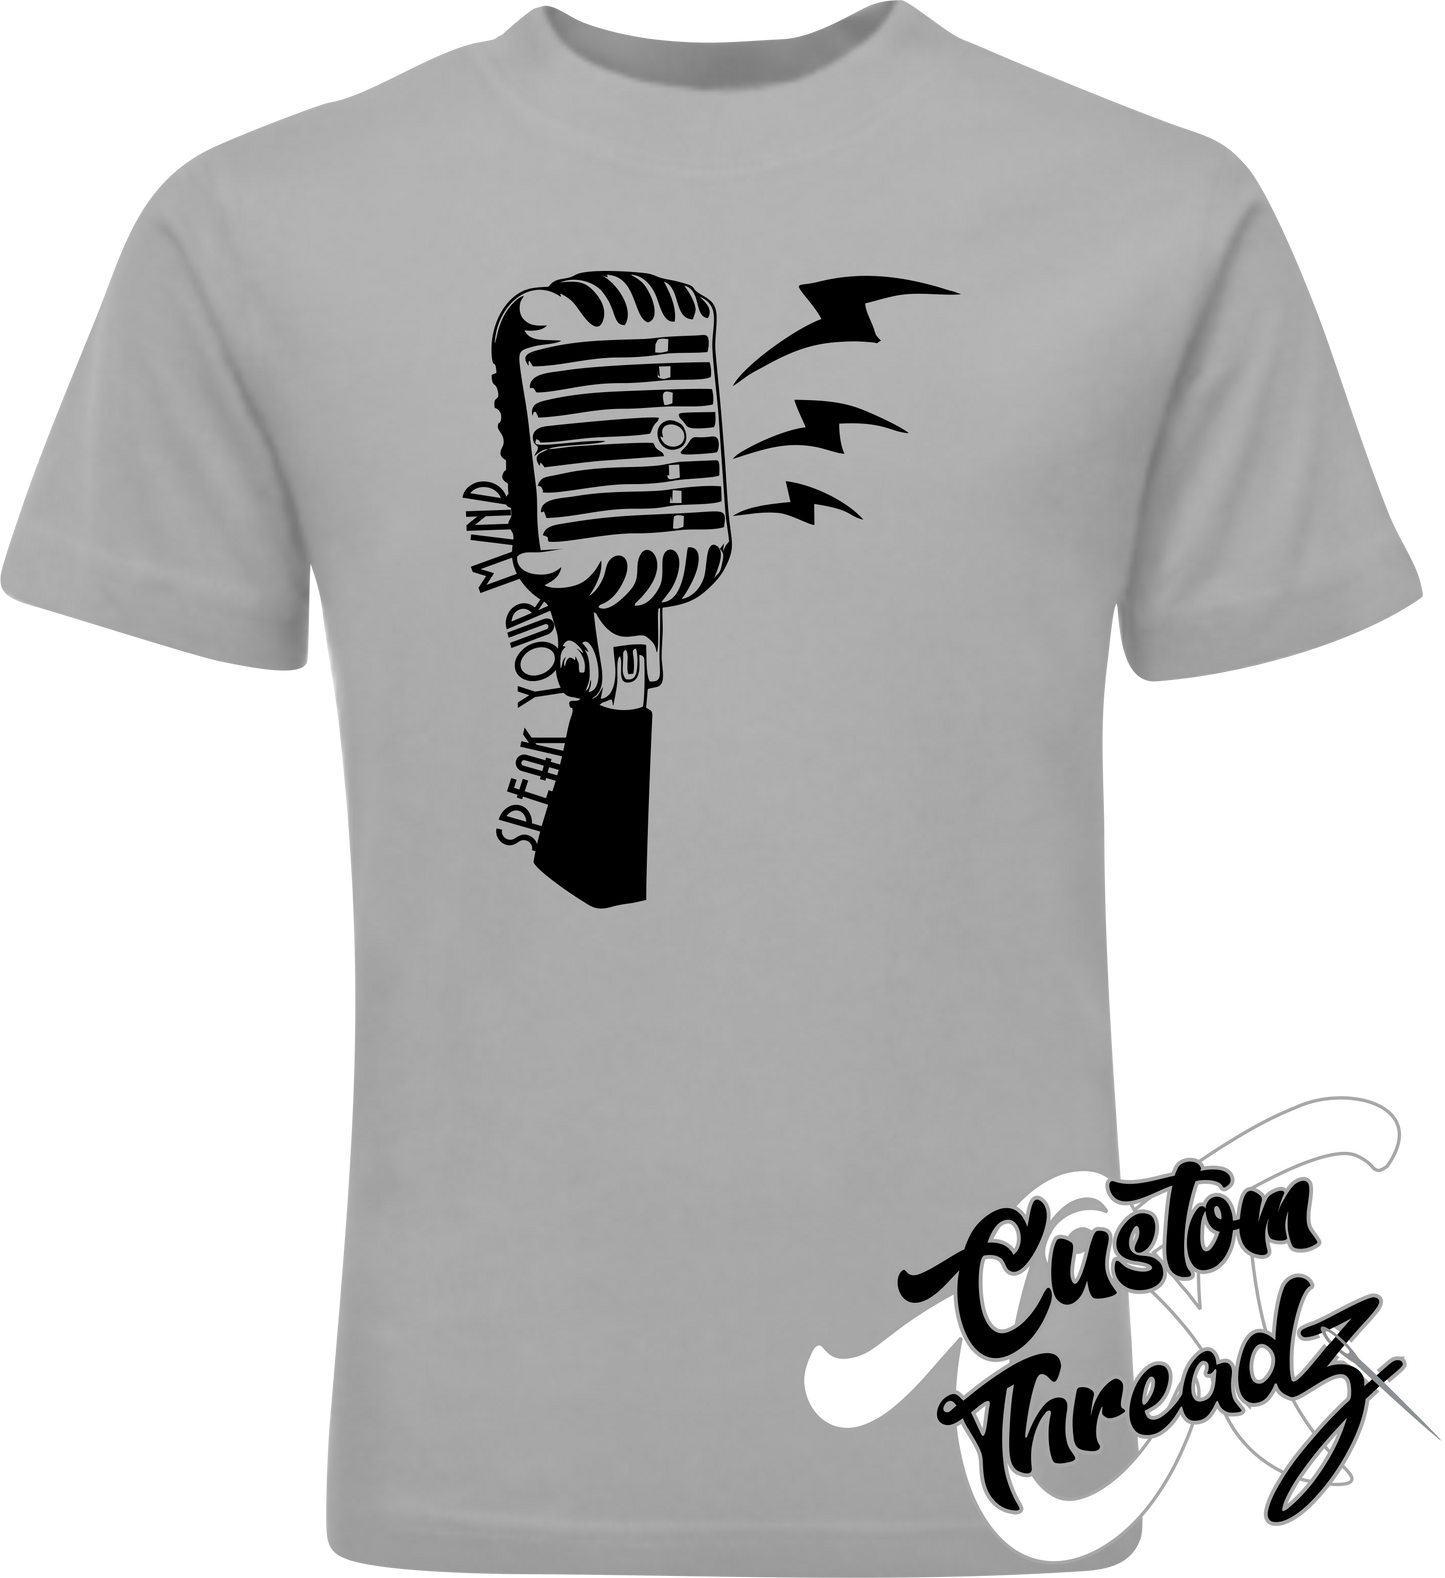 silver youth tee with speak your mind microphone DTG printed design